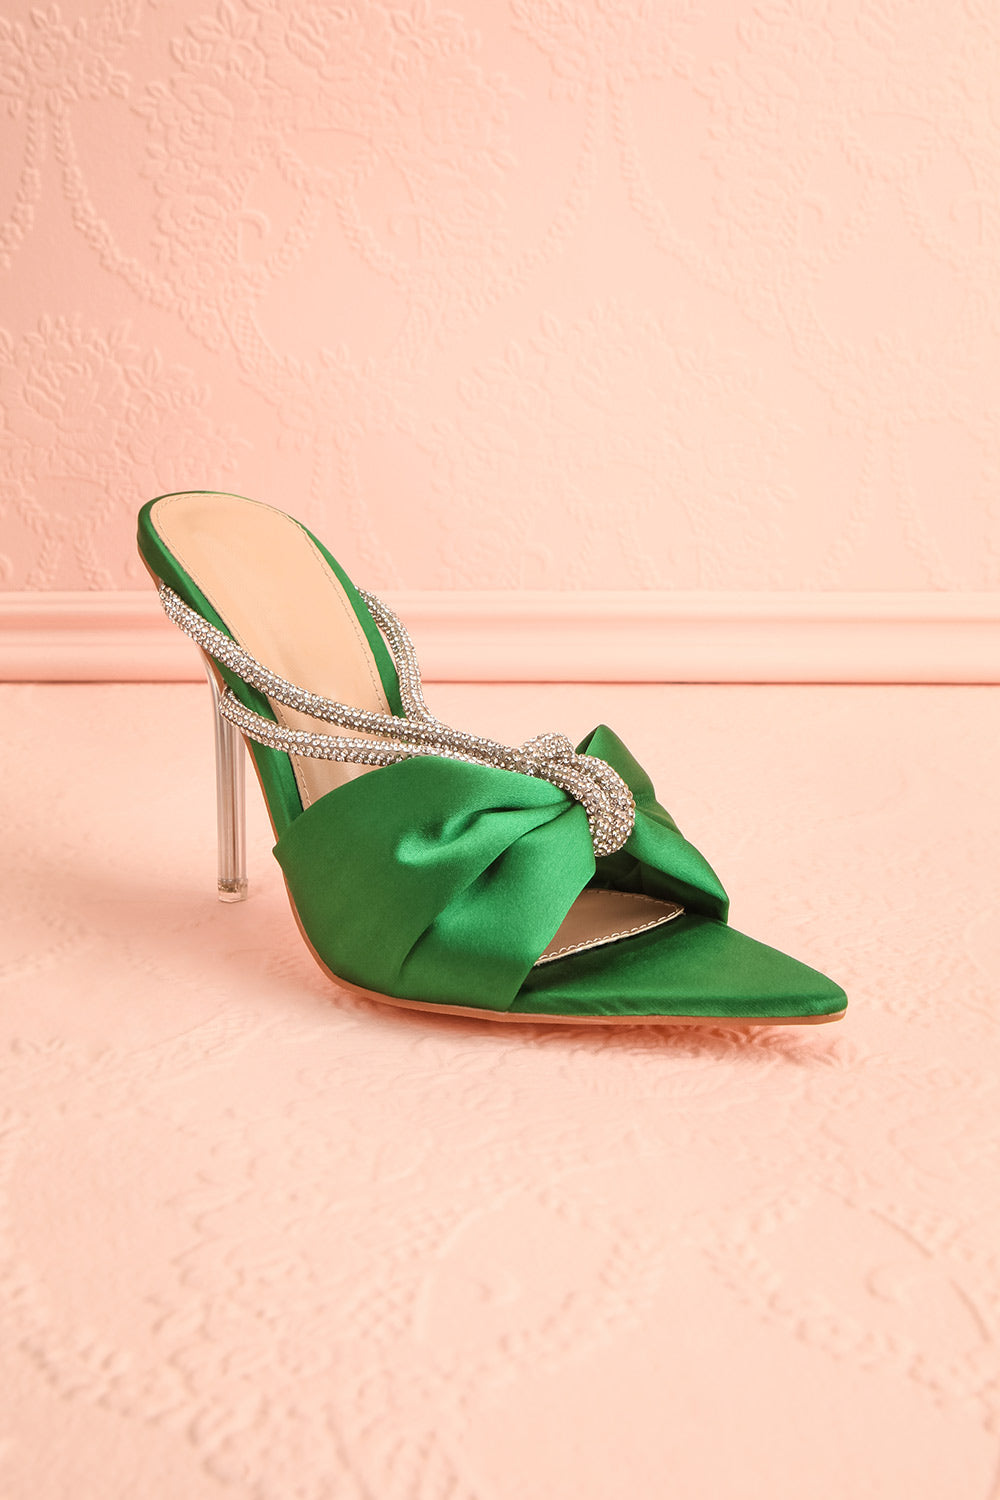 Chamaeleon Green Pointed-Toe Heels w/ Sequin Knot | Boutique 1861 front view